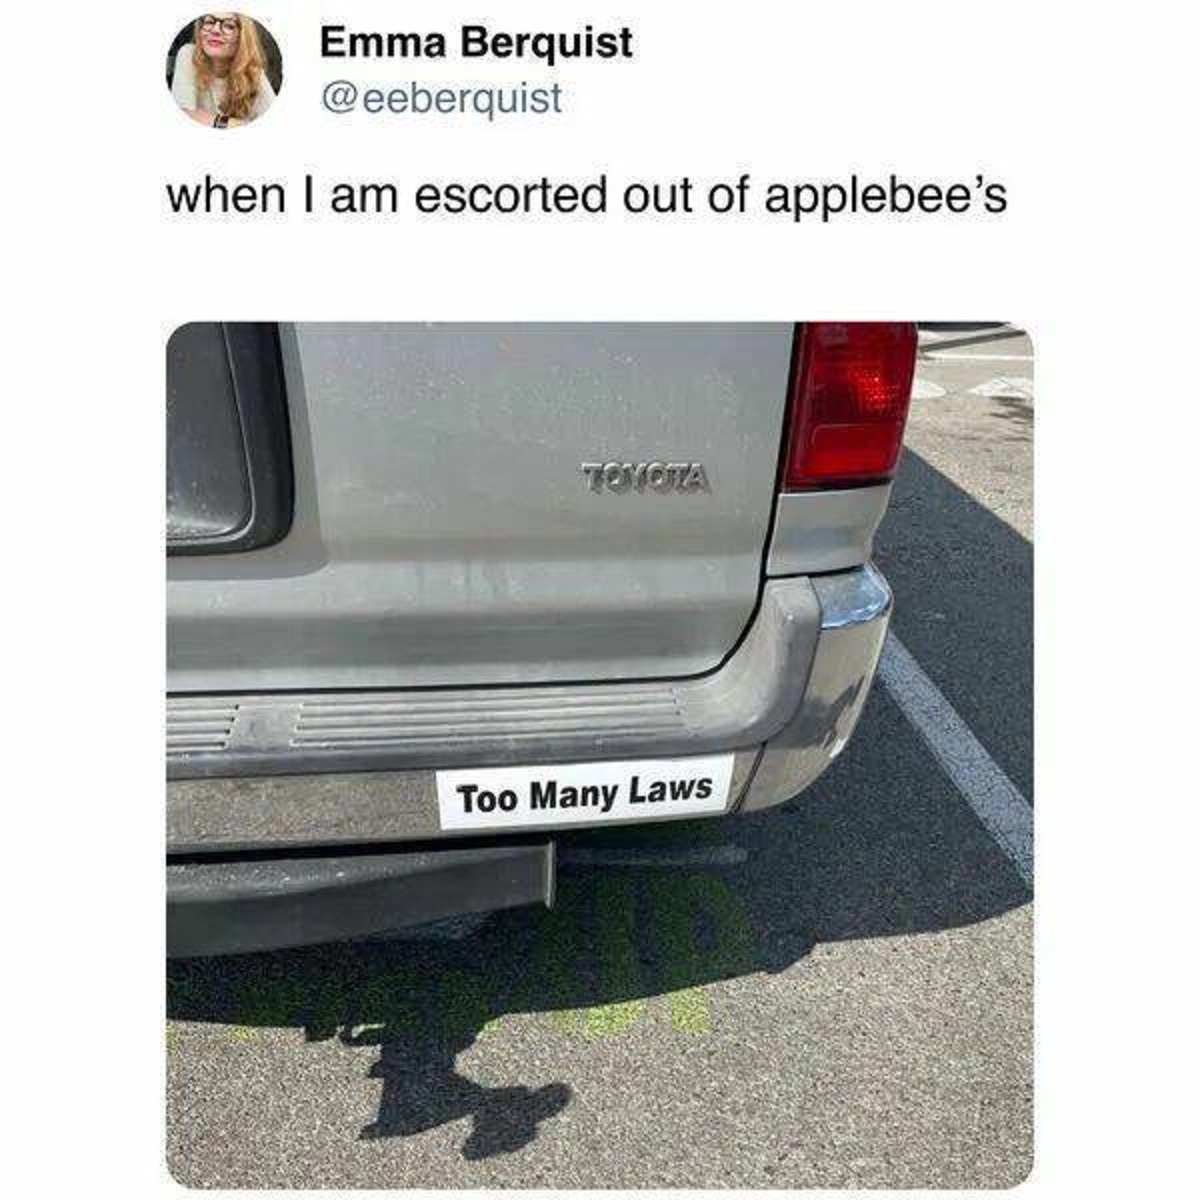 funny tweets - vehicle door - Emma Berquist when I am escorted out of applebee's Toyota Too Many Laws